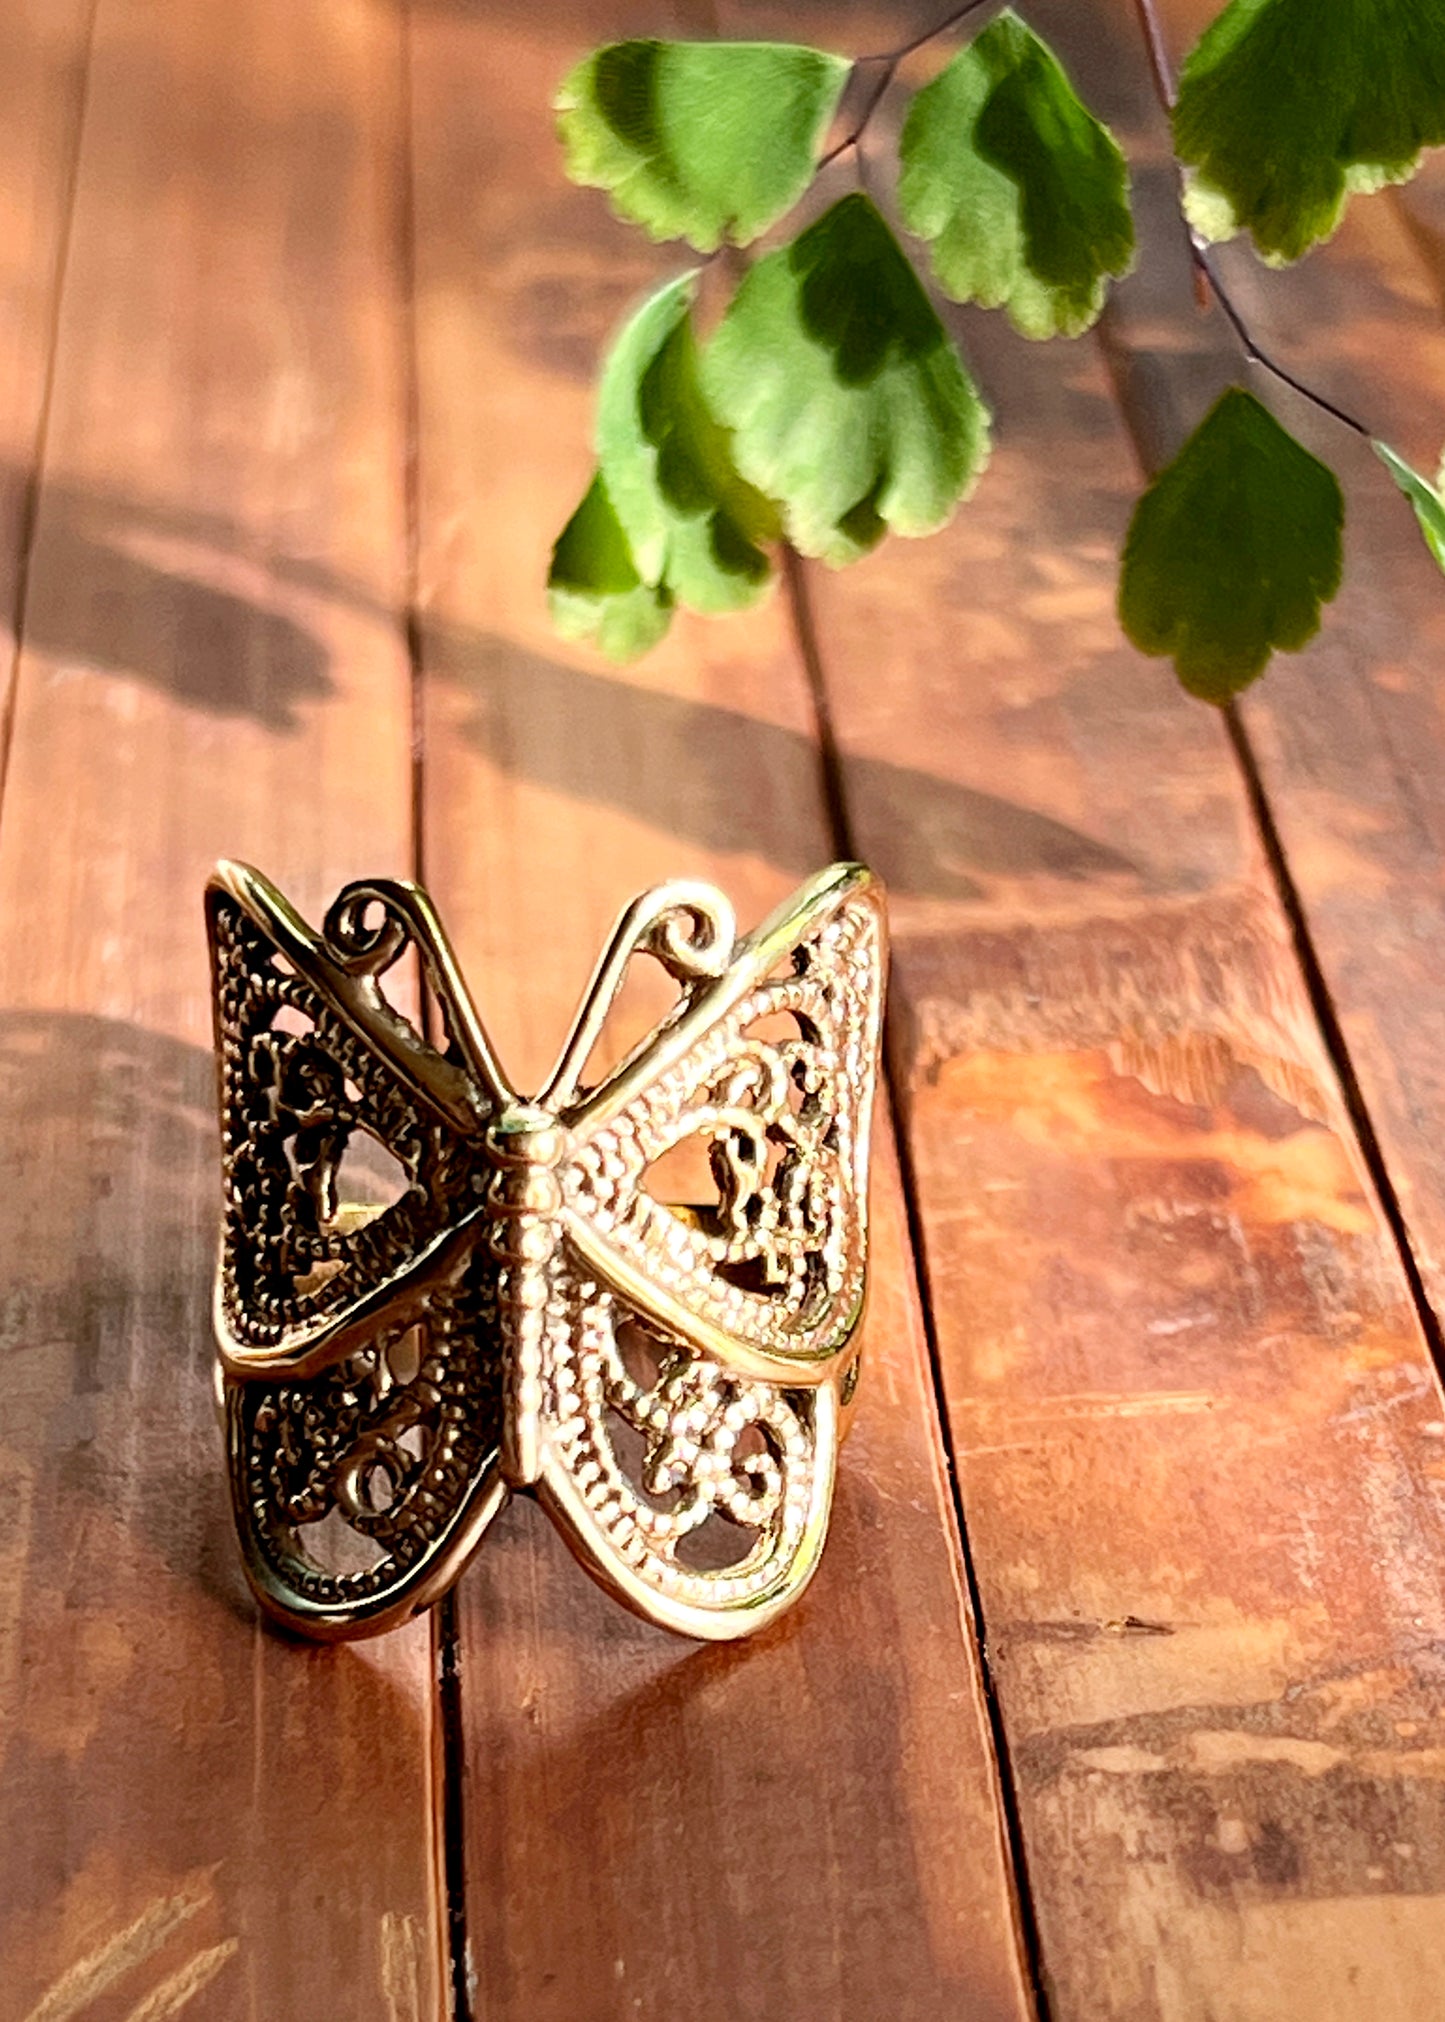 Brass Butterfly Ring | Art Nouveau Ornate Insect Jewelry | Fairycore Whimsical Steampunk Witchy Mystical Boho Statement | Nature Inspired